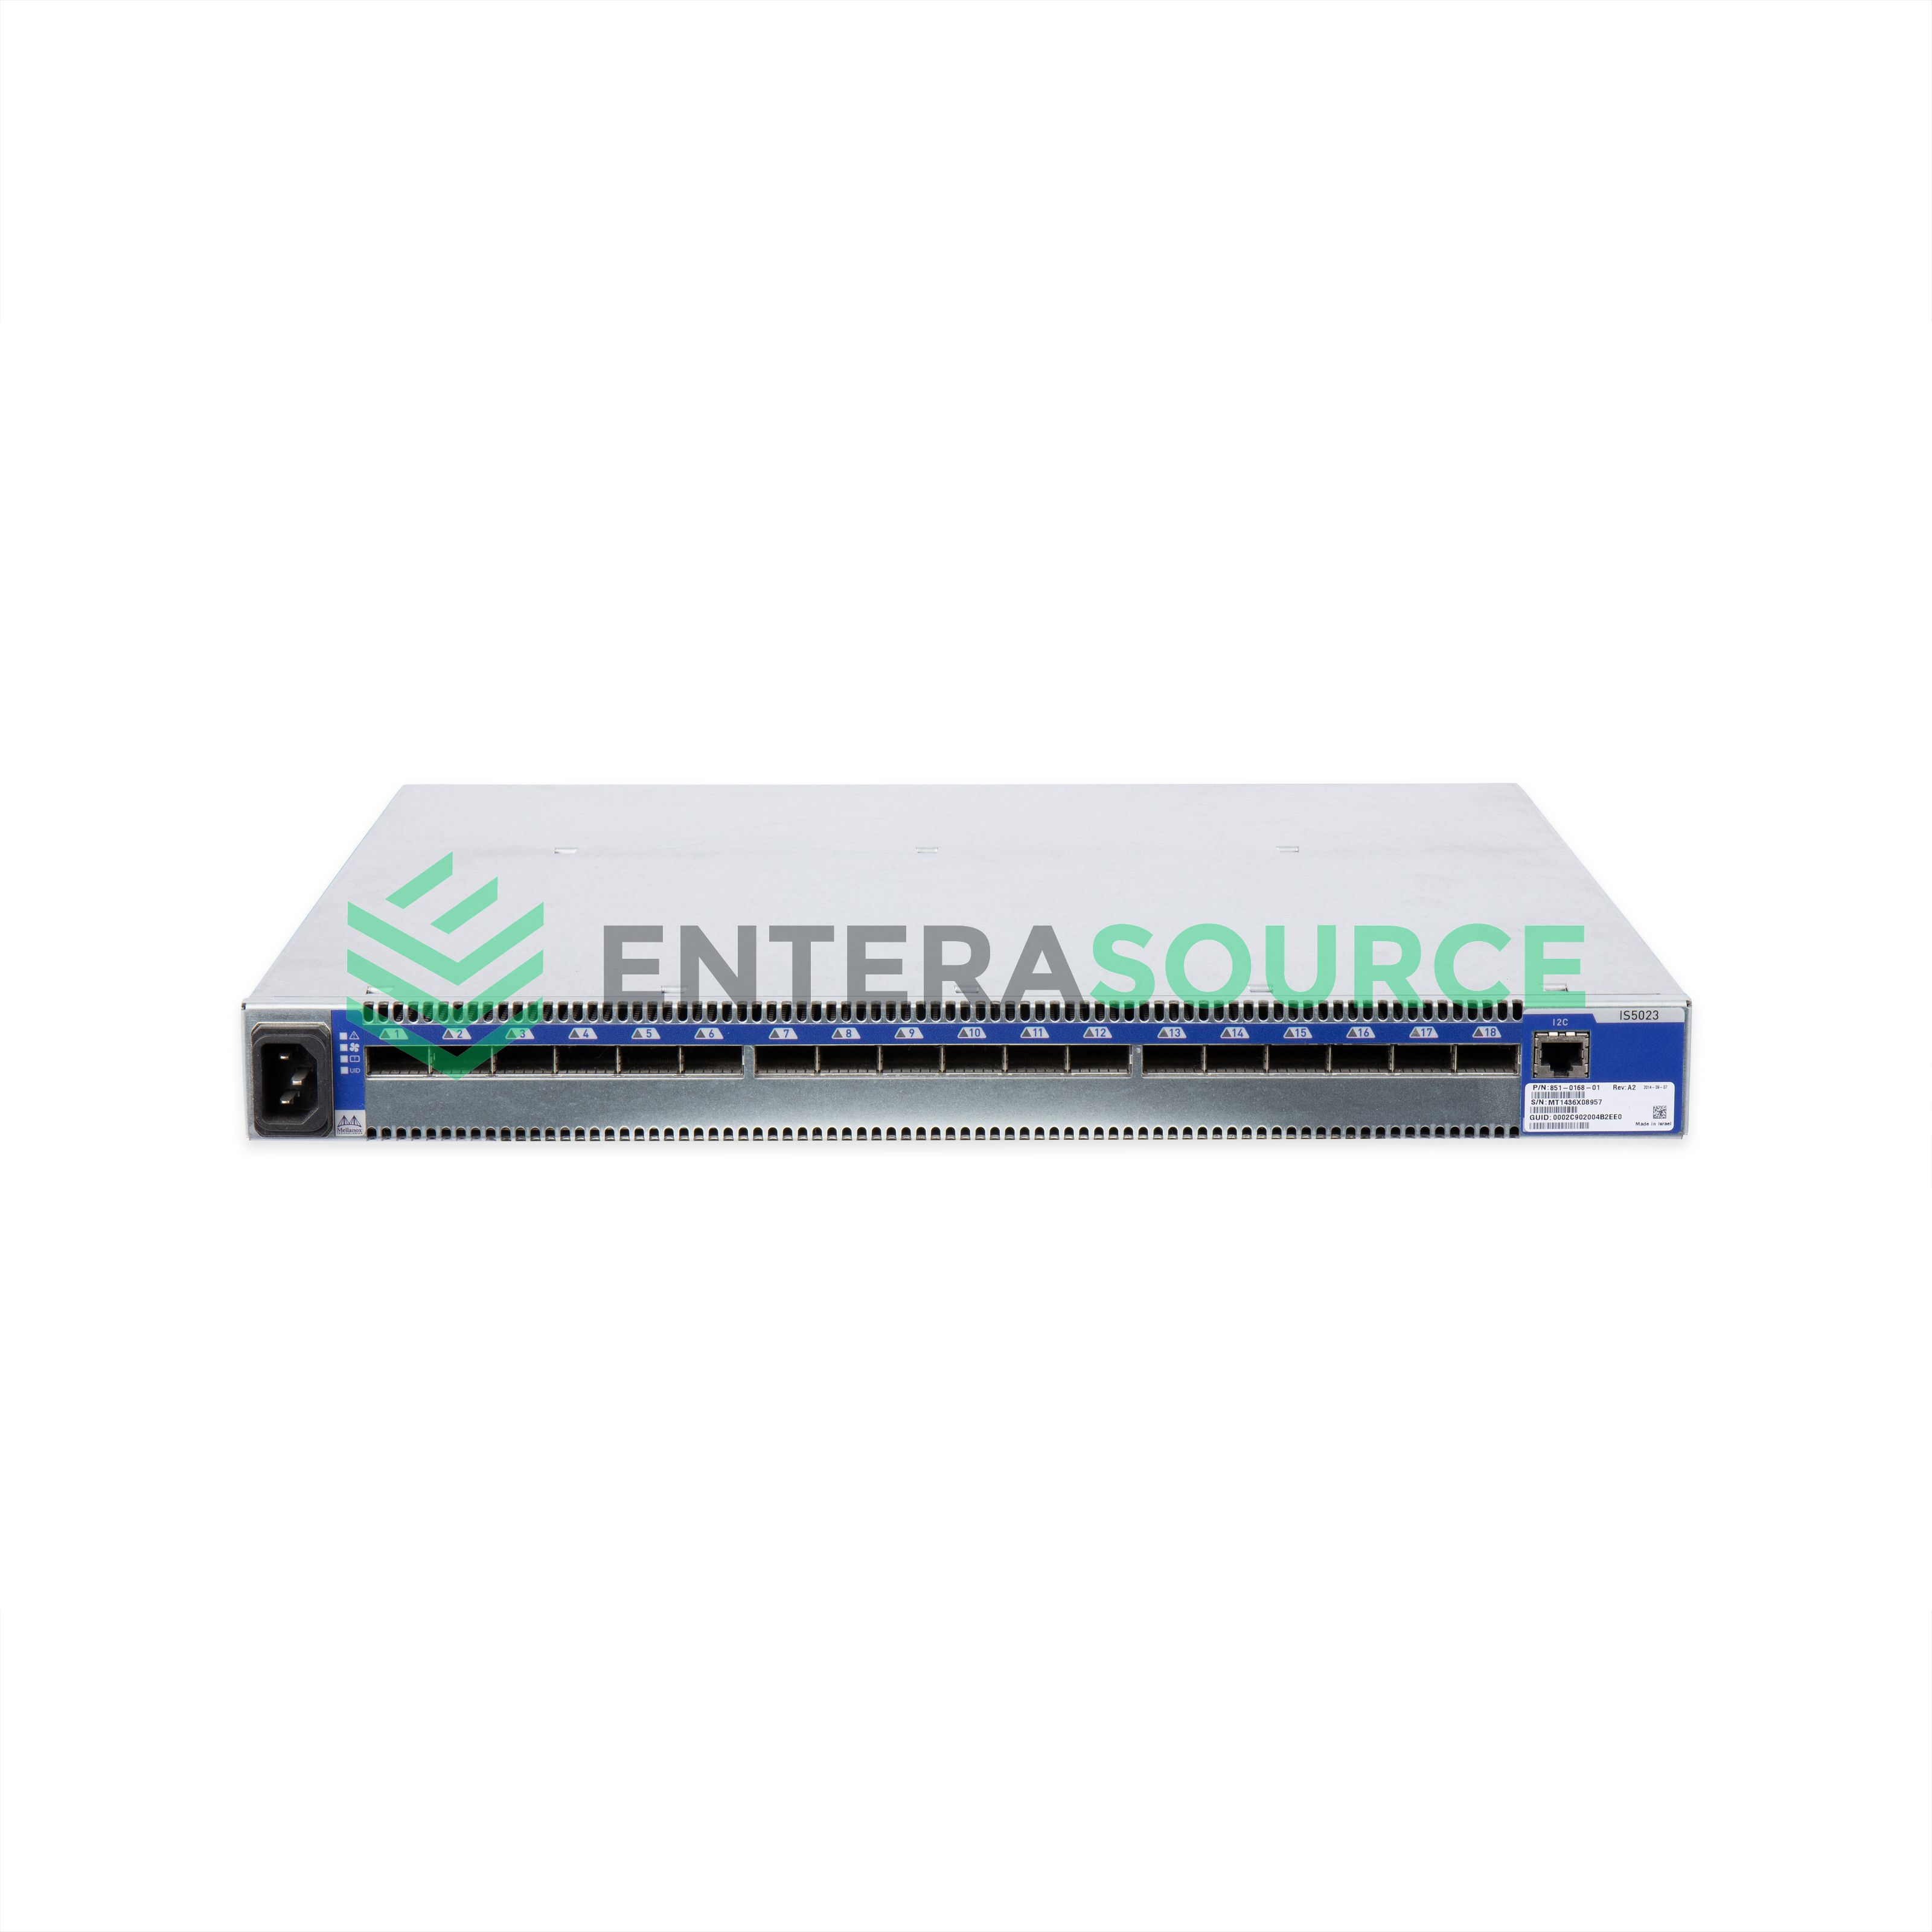 Mellanox 851-0168-01 InfiniScale IV IS5023 18 Port 40Gb QDR InfiniBand  Switch